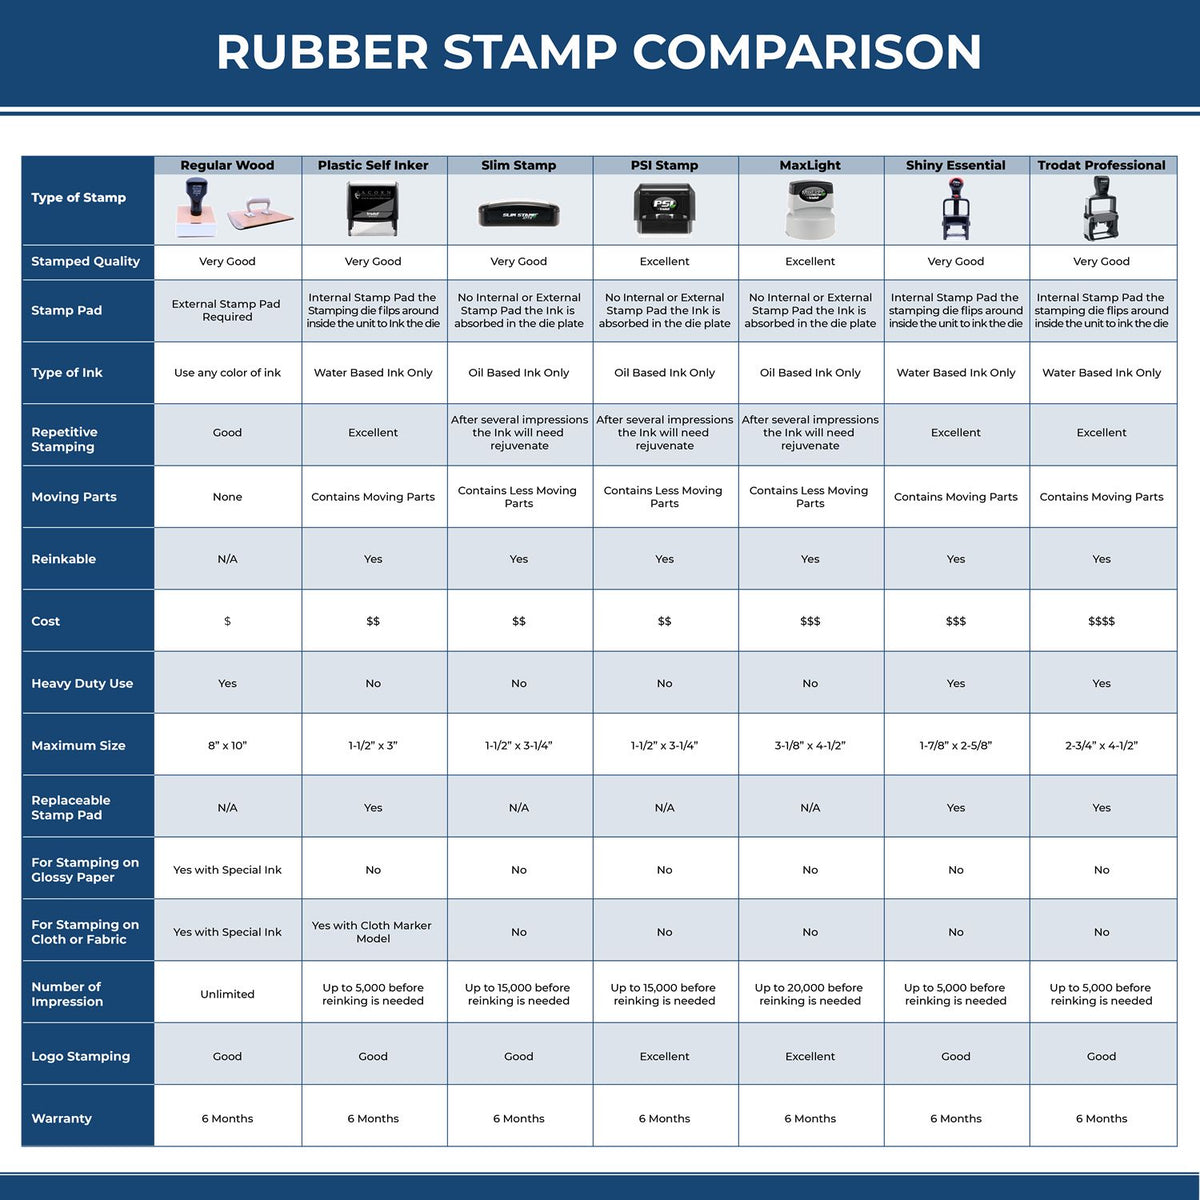 Large Self-Inking Bright Idea Stamp 5618S Rubber Stamp Comparison